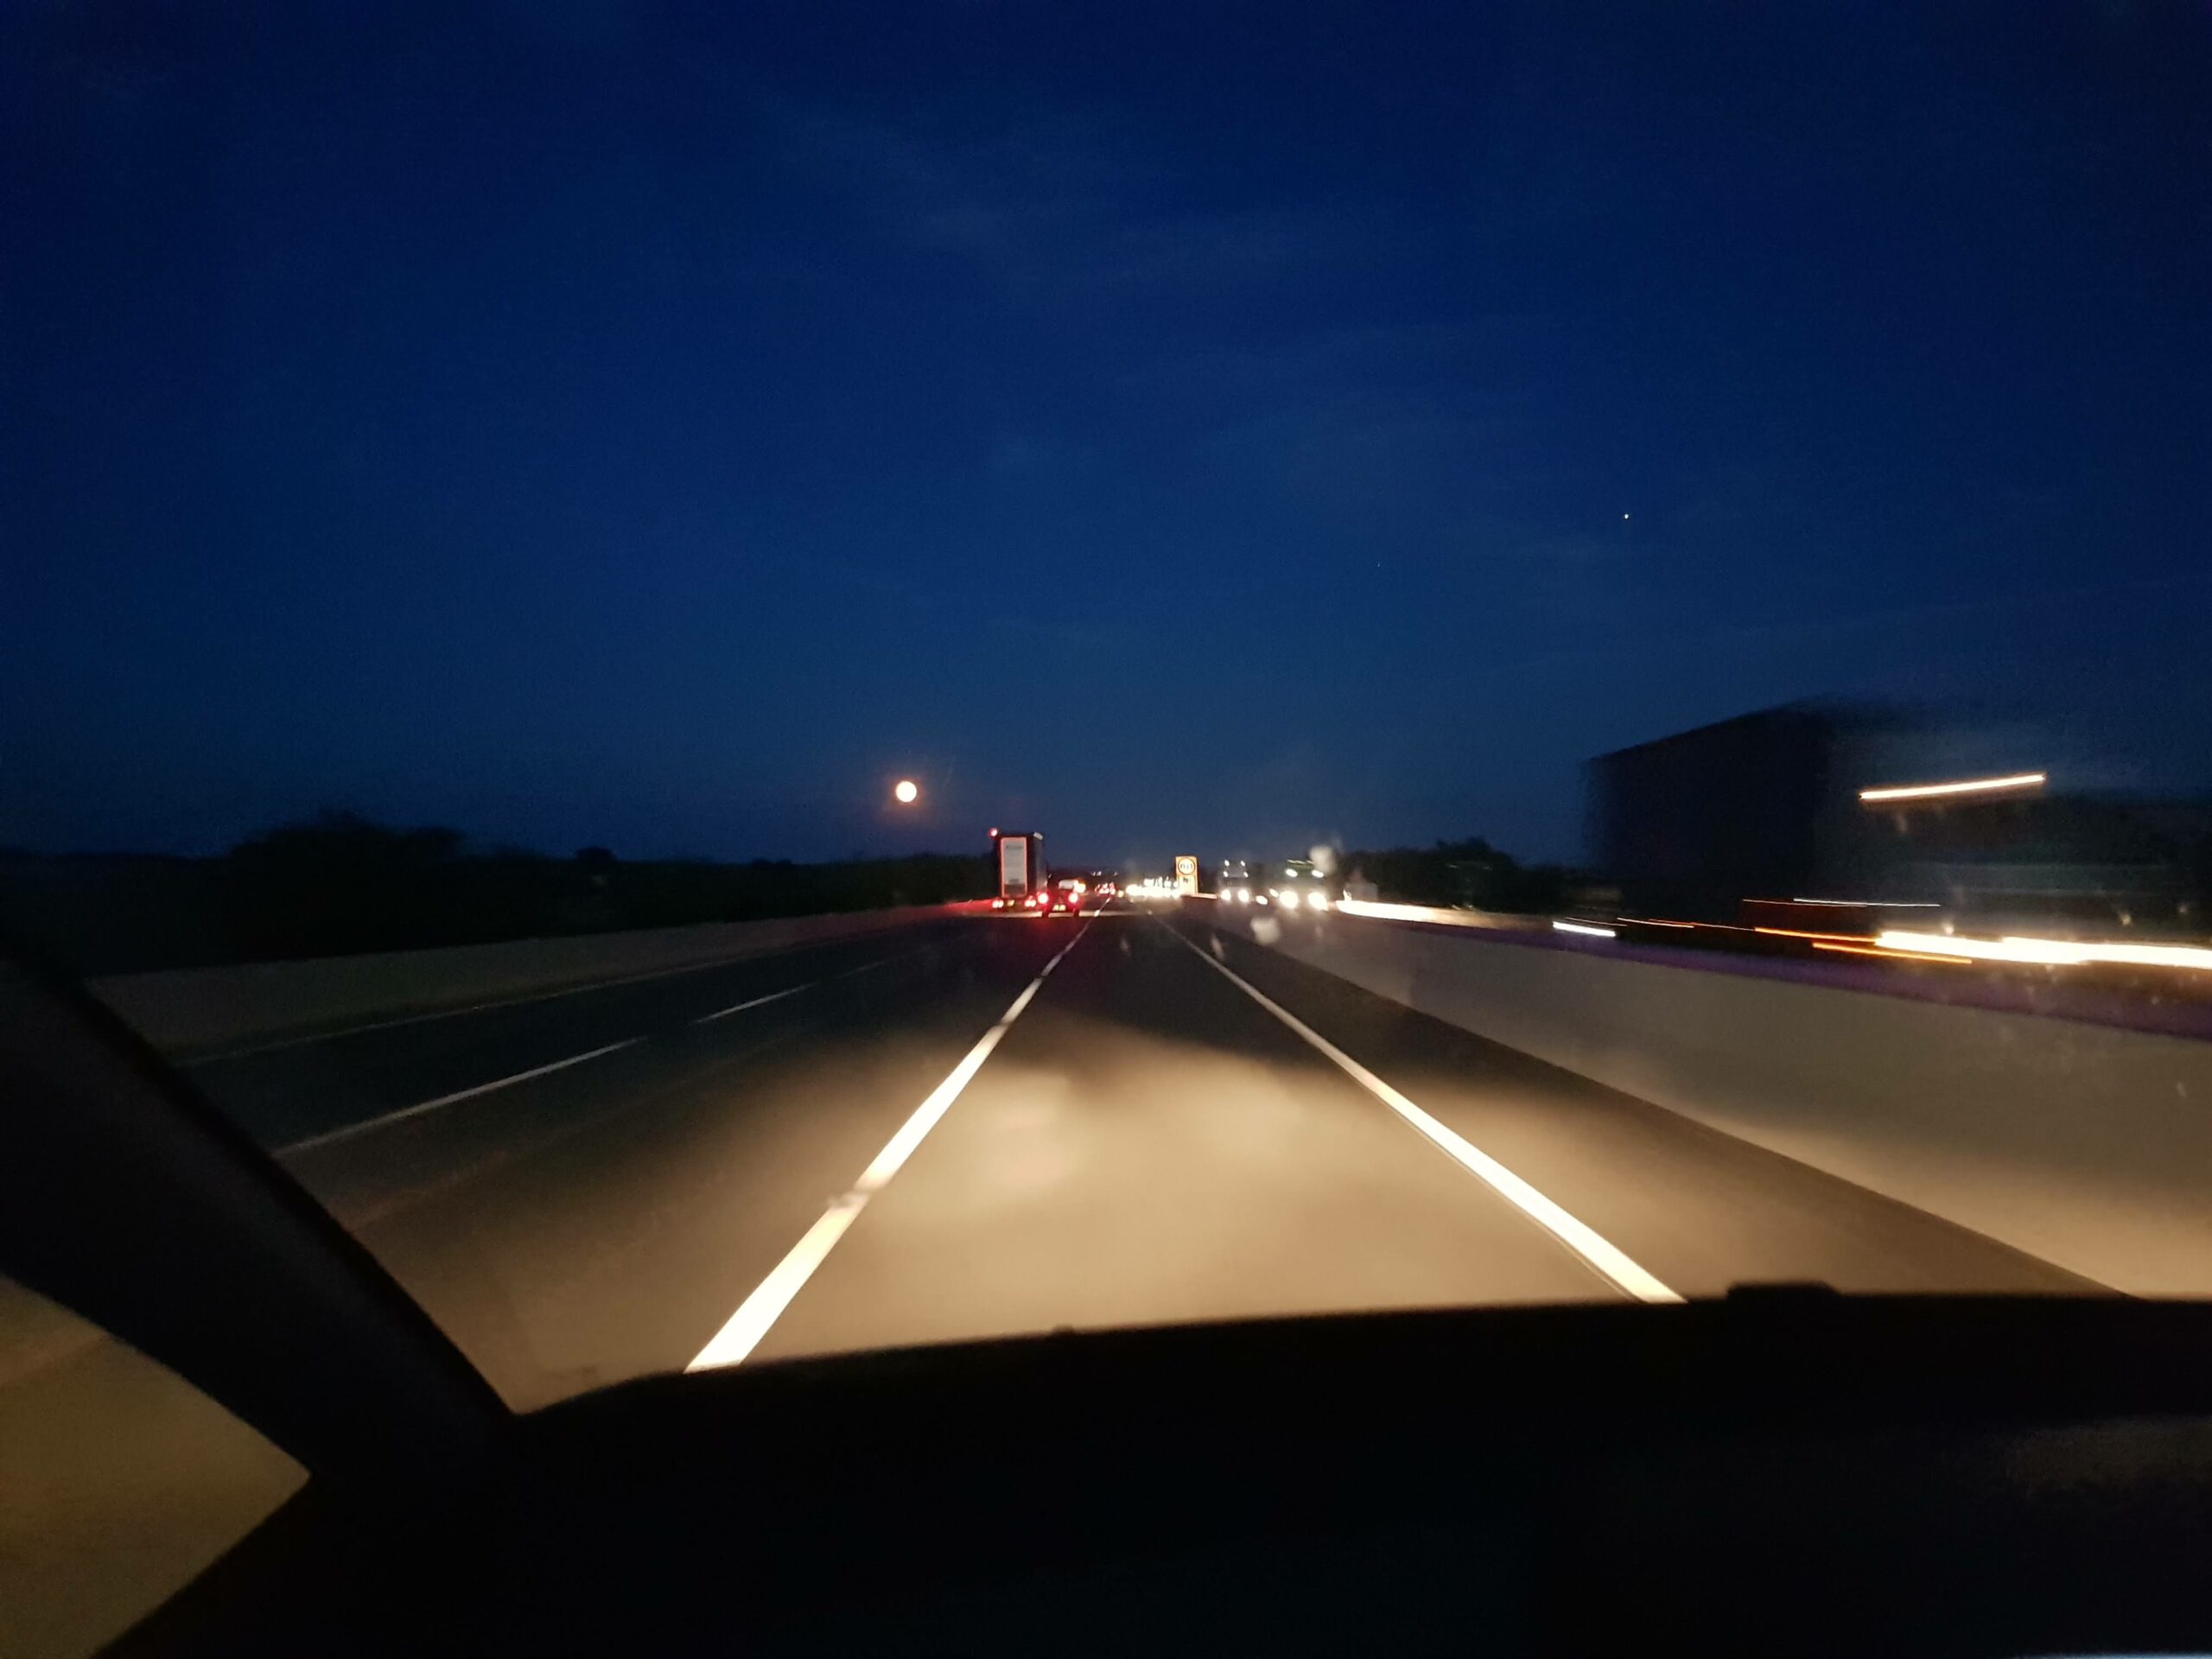 View from the passenger seat of a car along a moonlit motorway